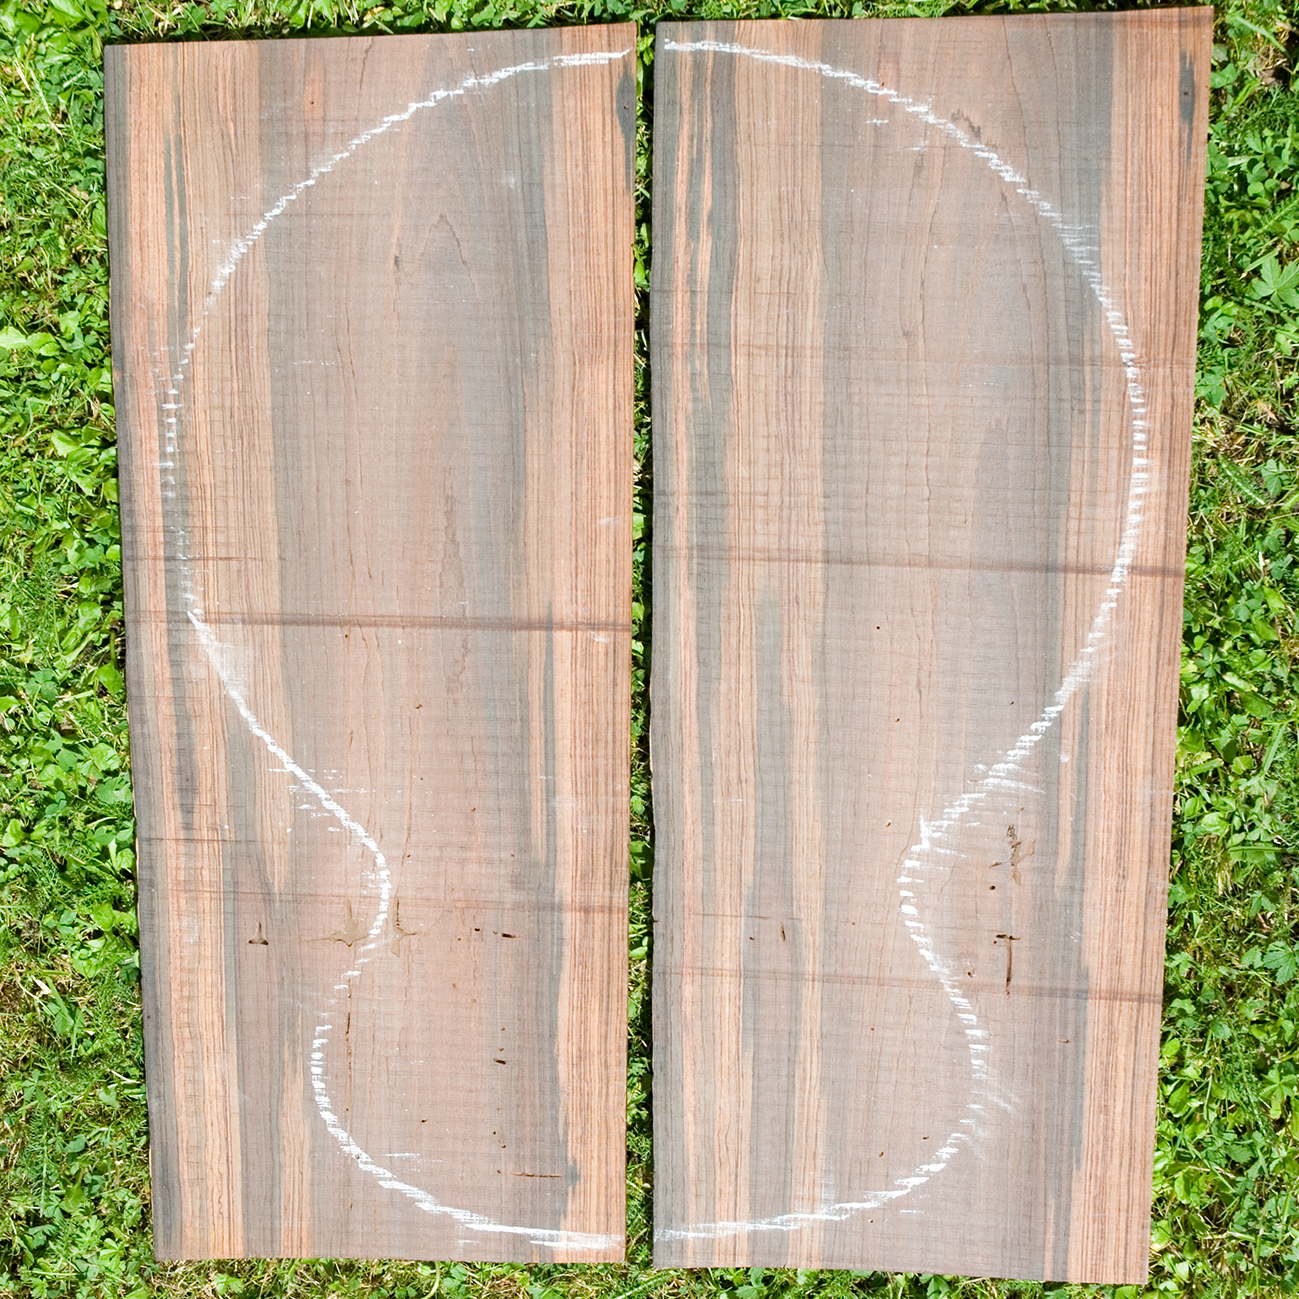 Two planks of wood with the outline of a guitar marked on with chalk.